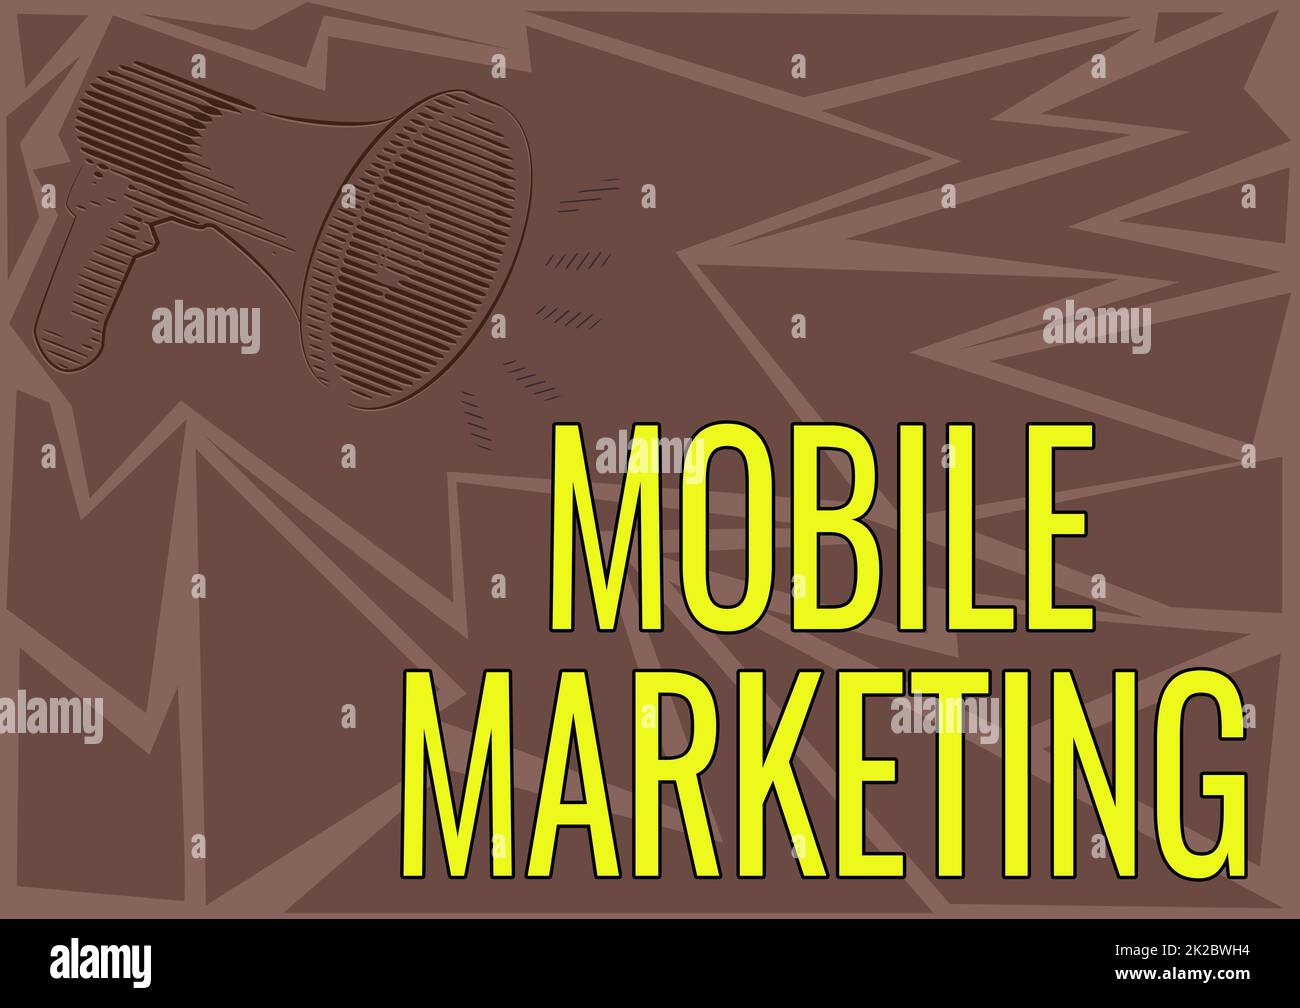 Sign displaying Mobile Marketing. Internet Concept technique focused reaching audience on their smart device Illustration Of A Loud Megaphones Speaker Making New Announcements. Stock Photo